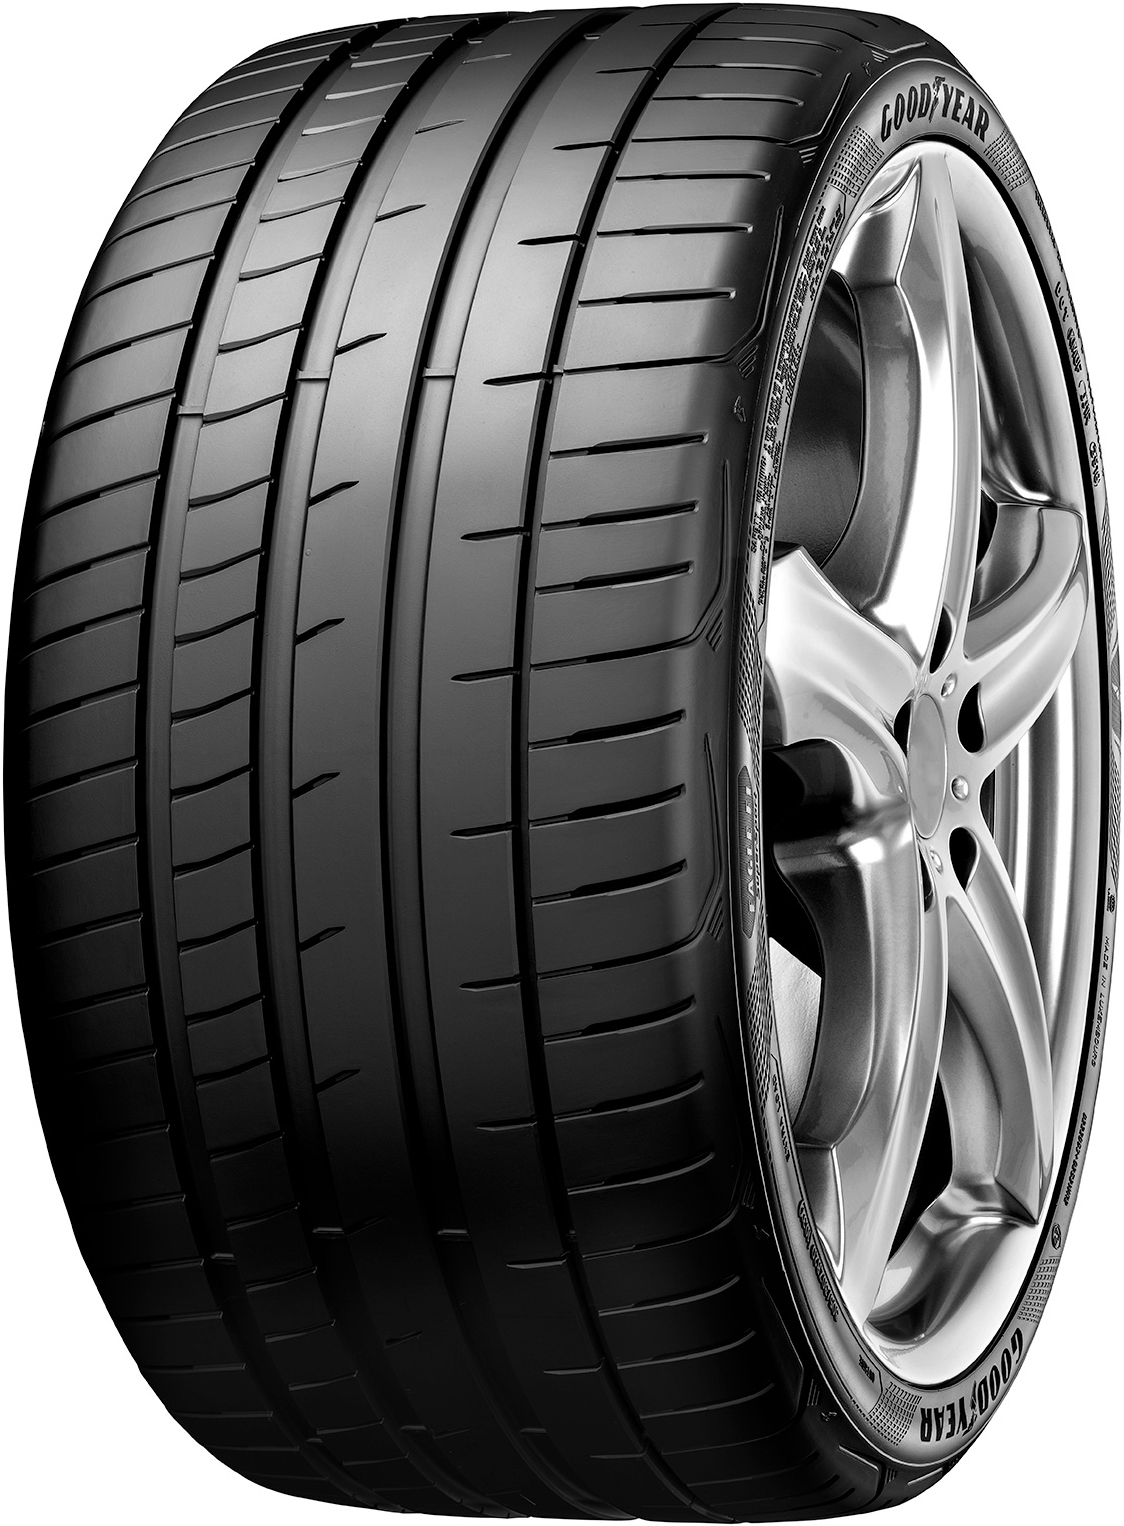 Anvelope auto GOODYEAR F1 SUPERSPORT XL FP 275/35 R20 102Y